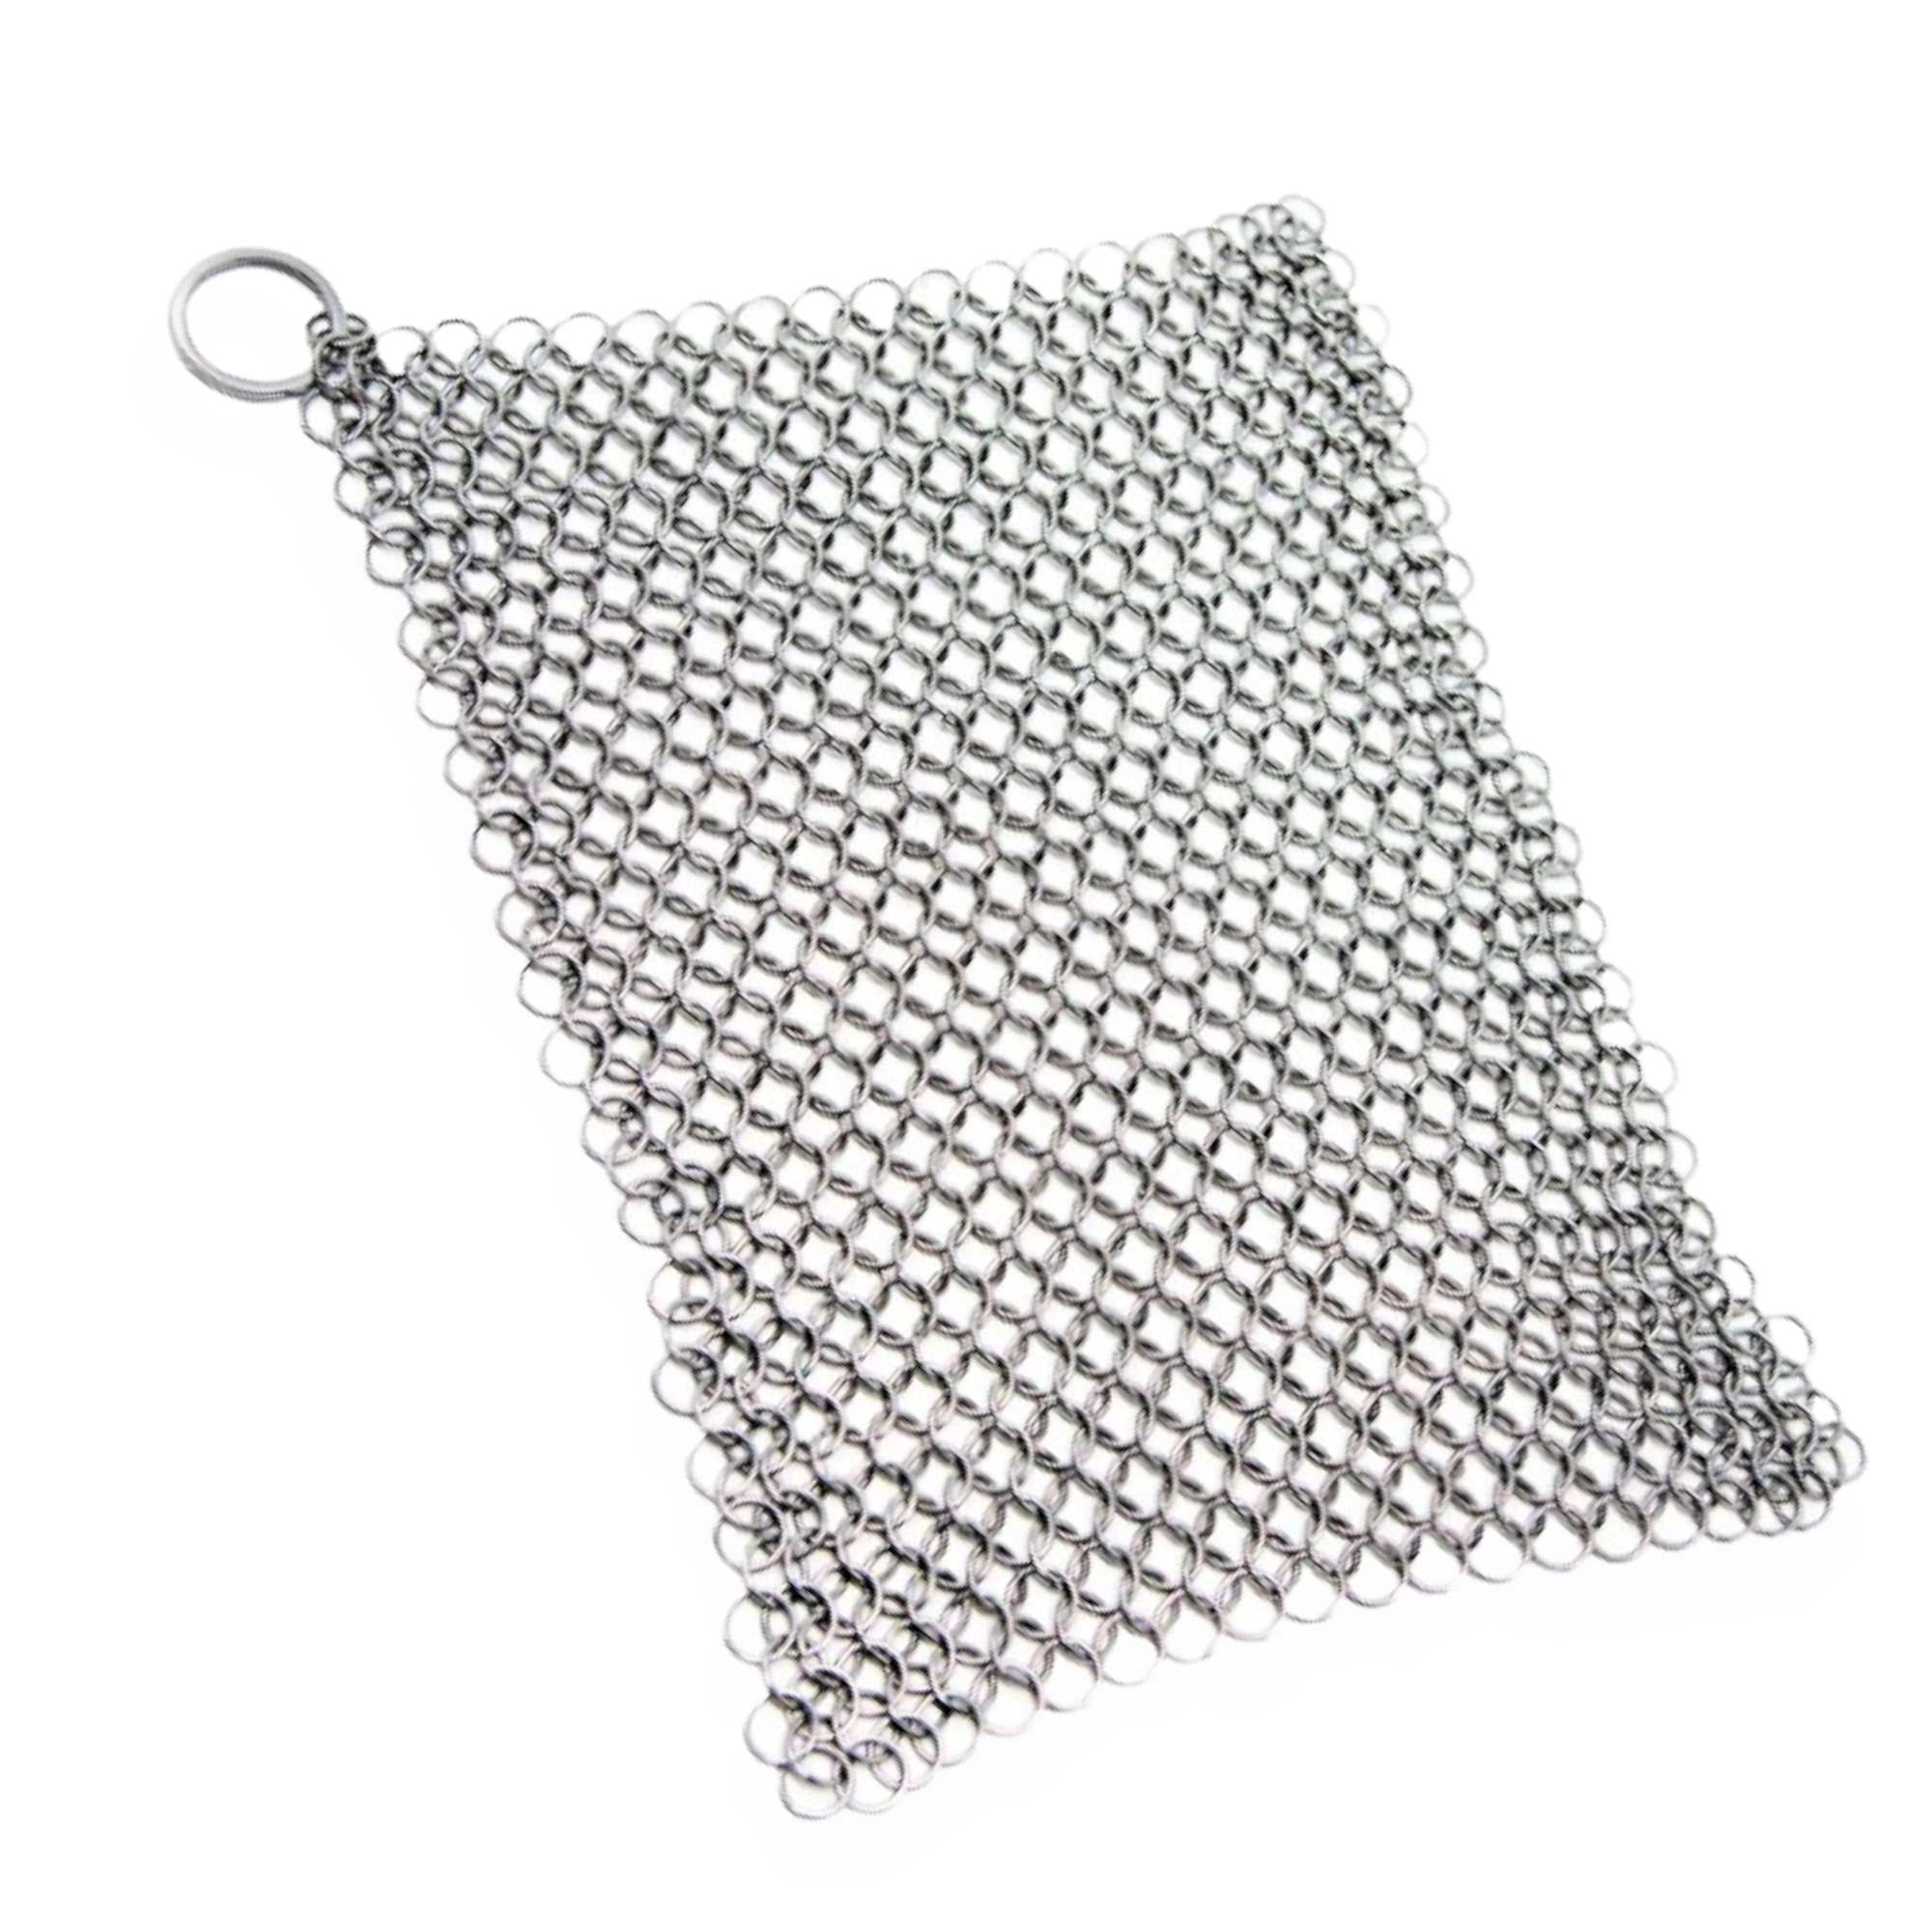 Chain mail or stainless steel scrubber? : r/castiron